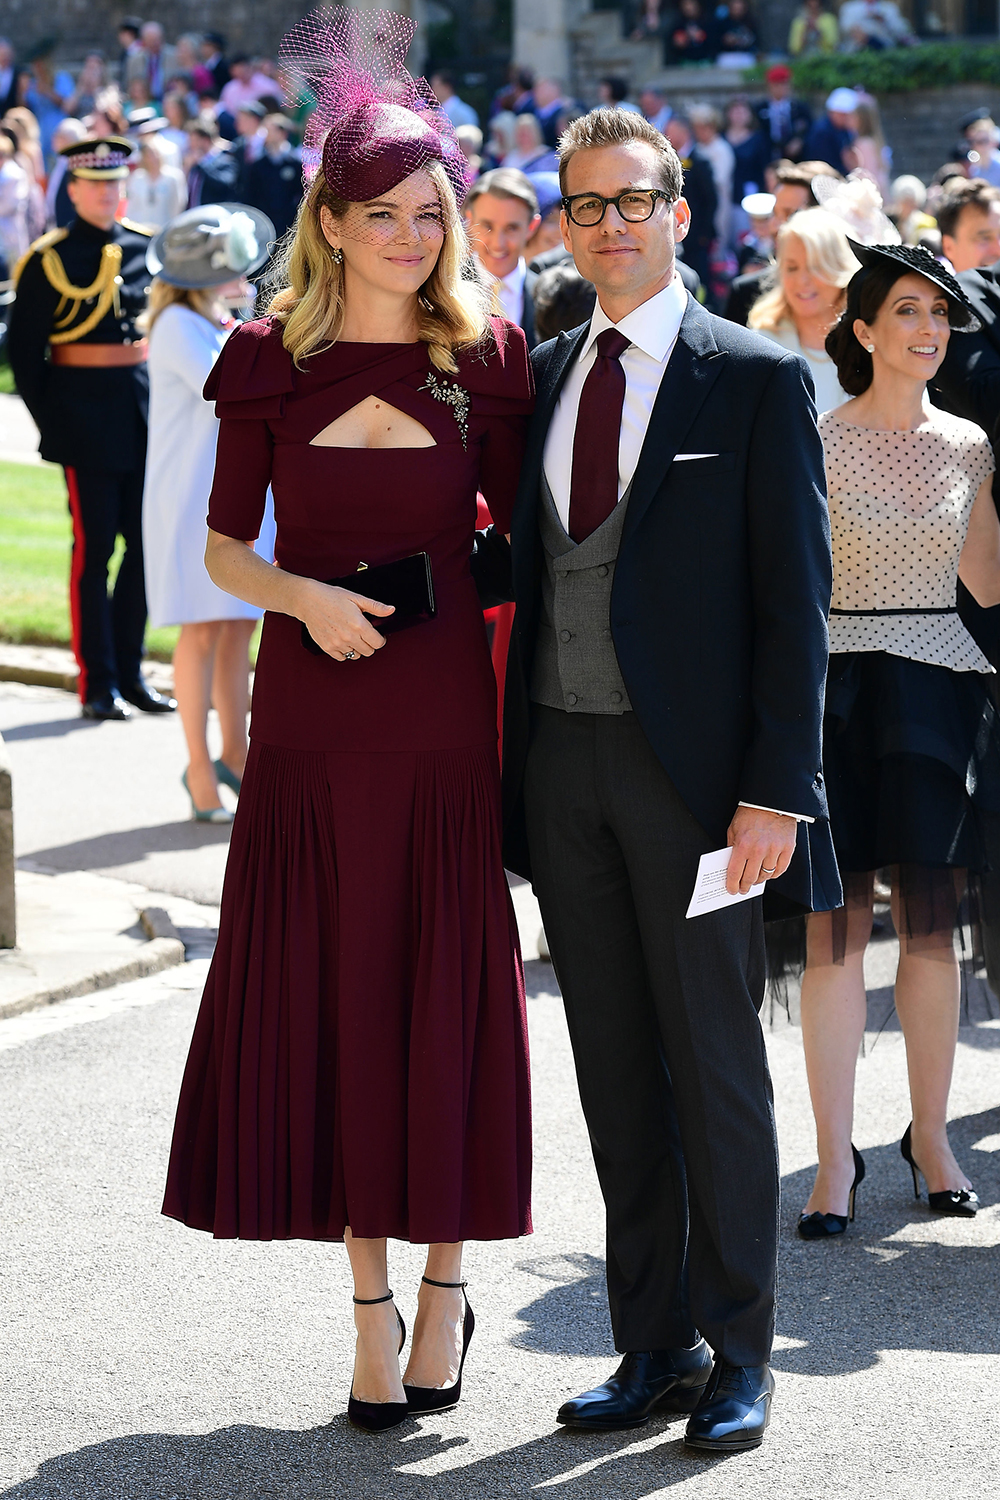 the royal wedding guests outfitsimage